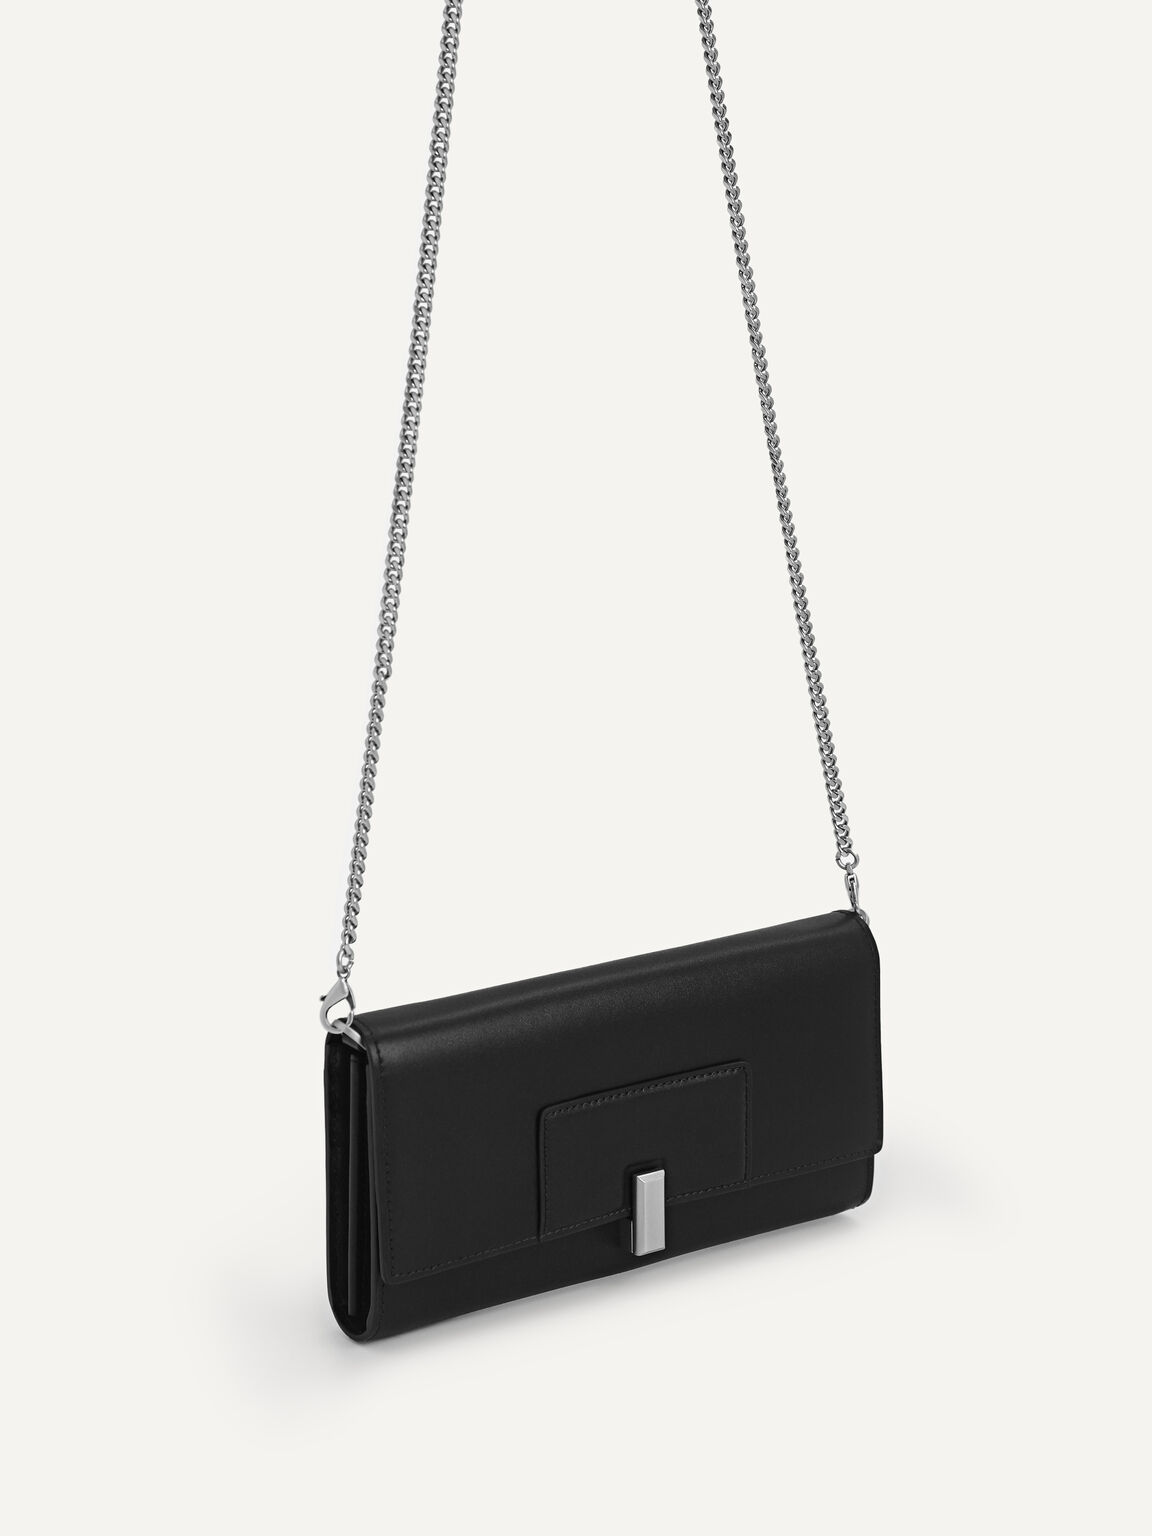 Monochrome Long Leather Wallet with Chain, Black